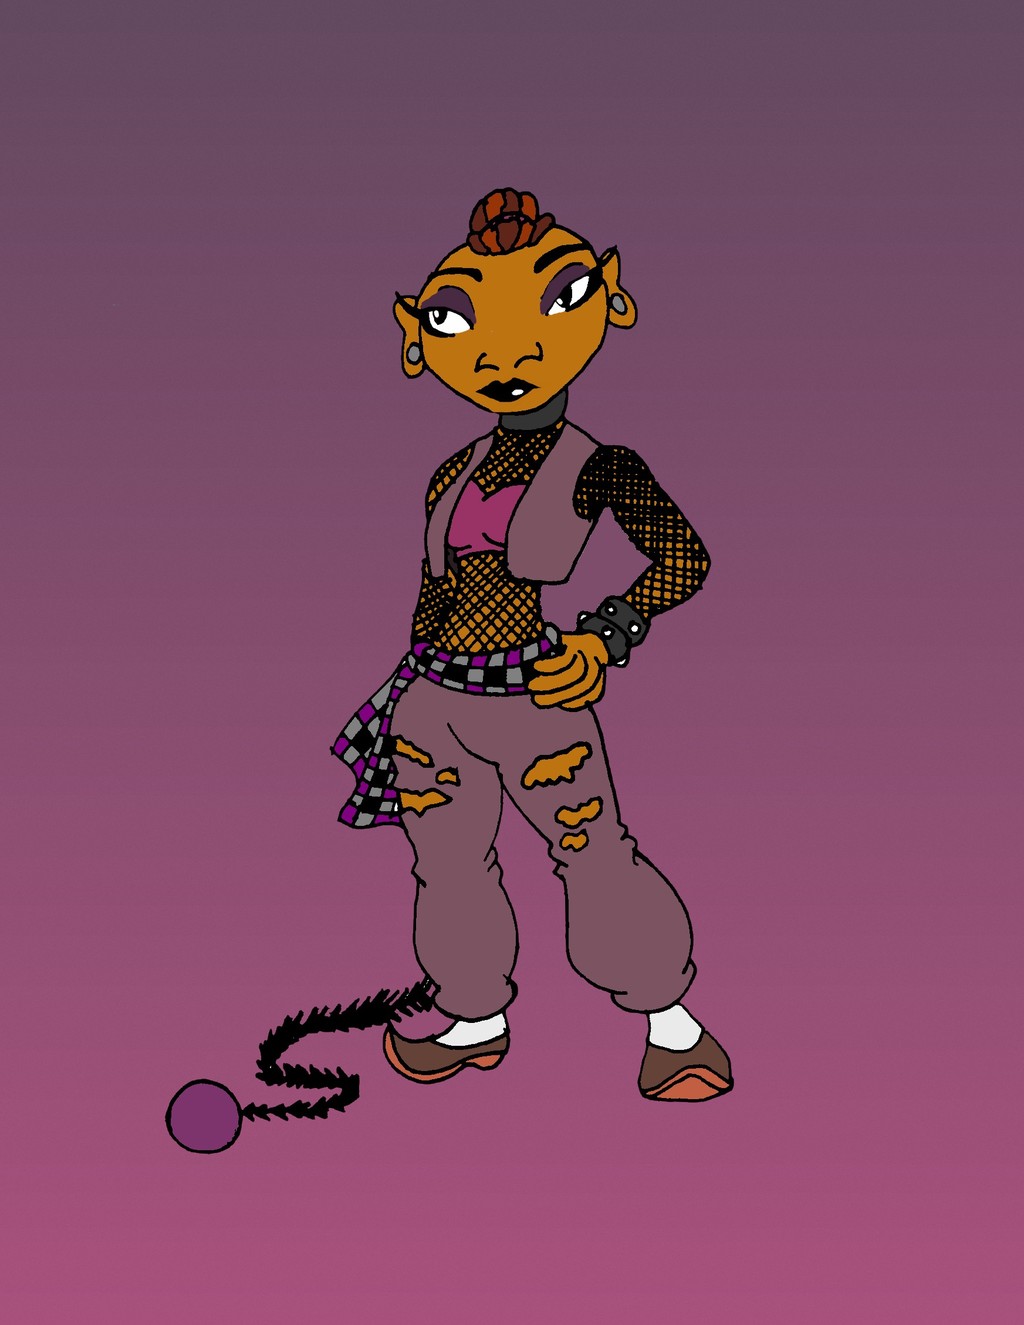 Most recent image: Dimah the Punk Belly Dancer